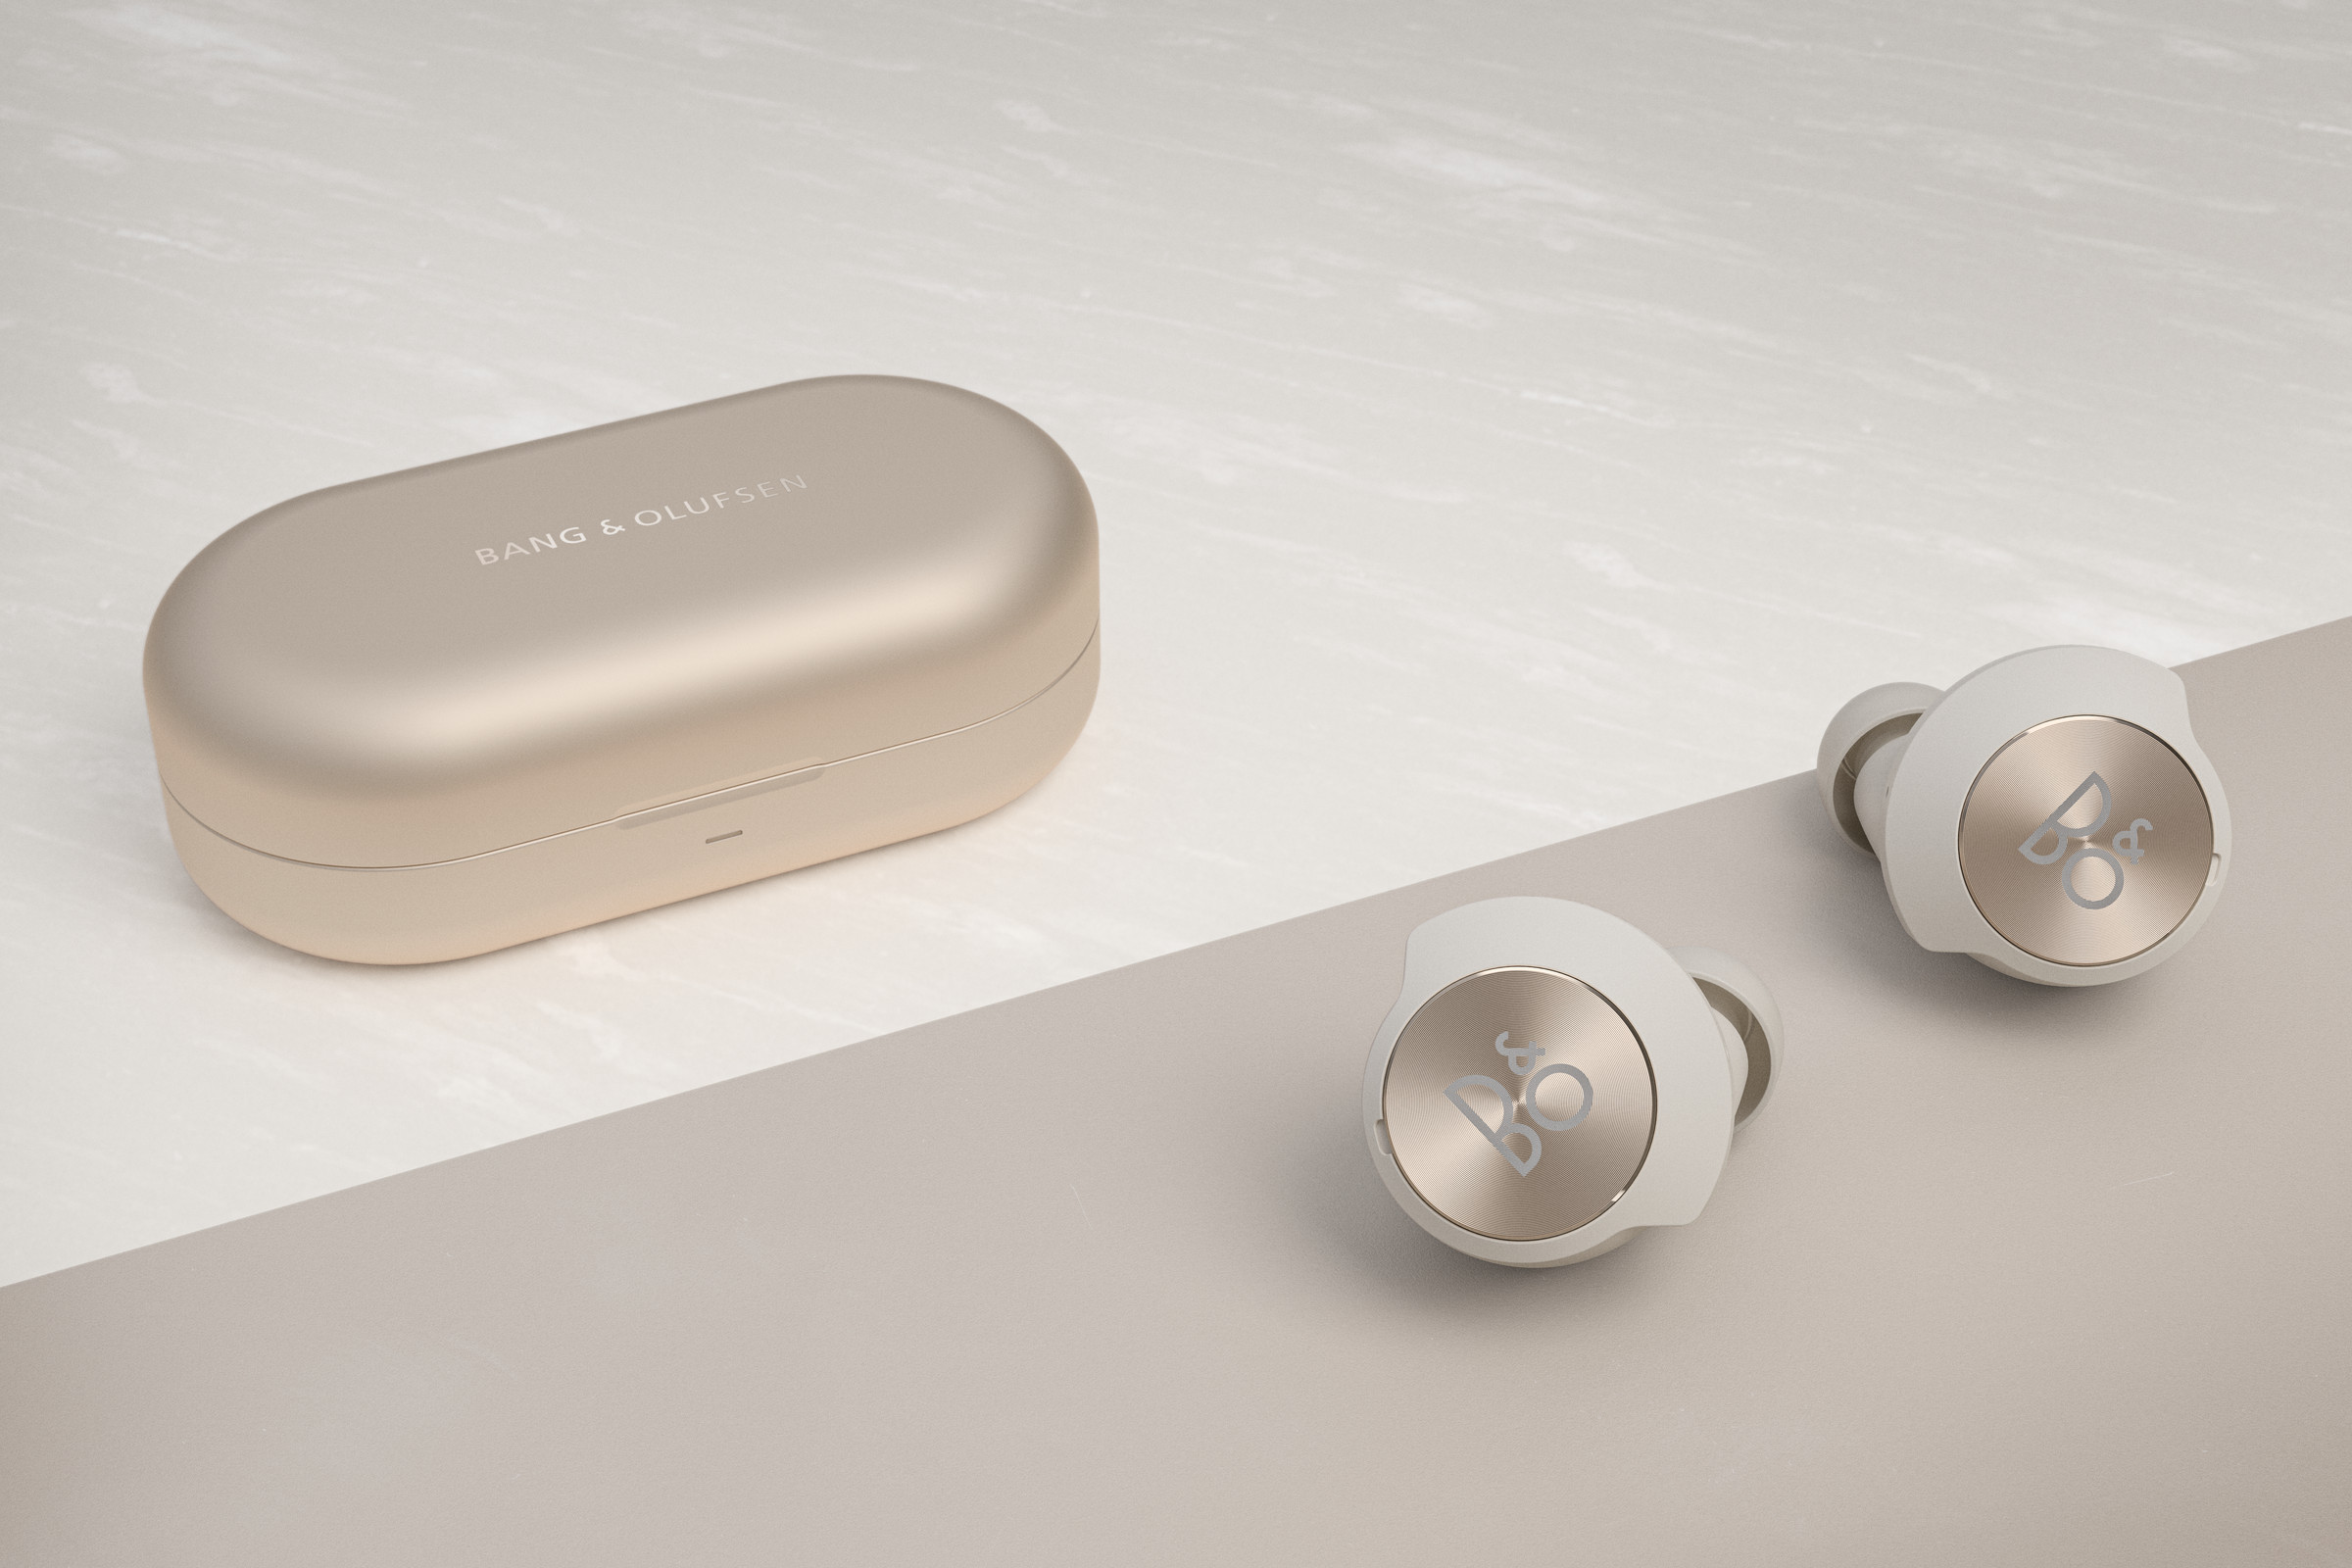 The Beoplay EQ are available in gold (pictured) and black.